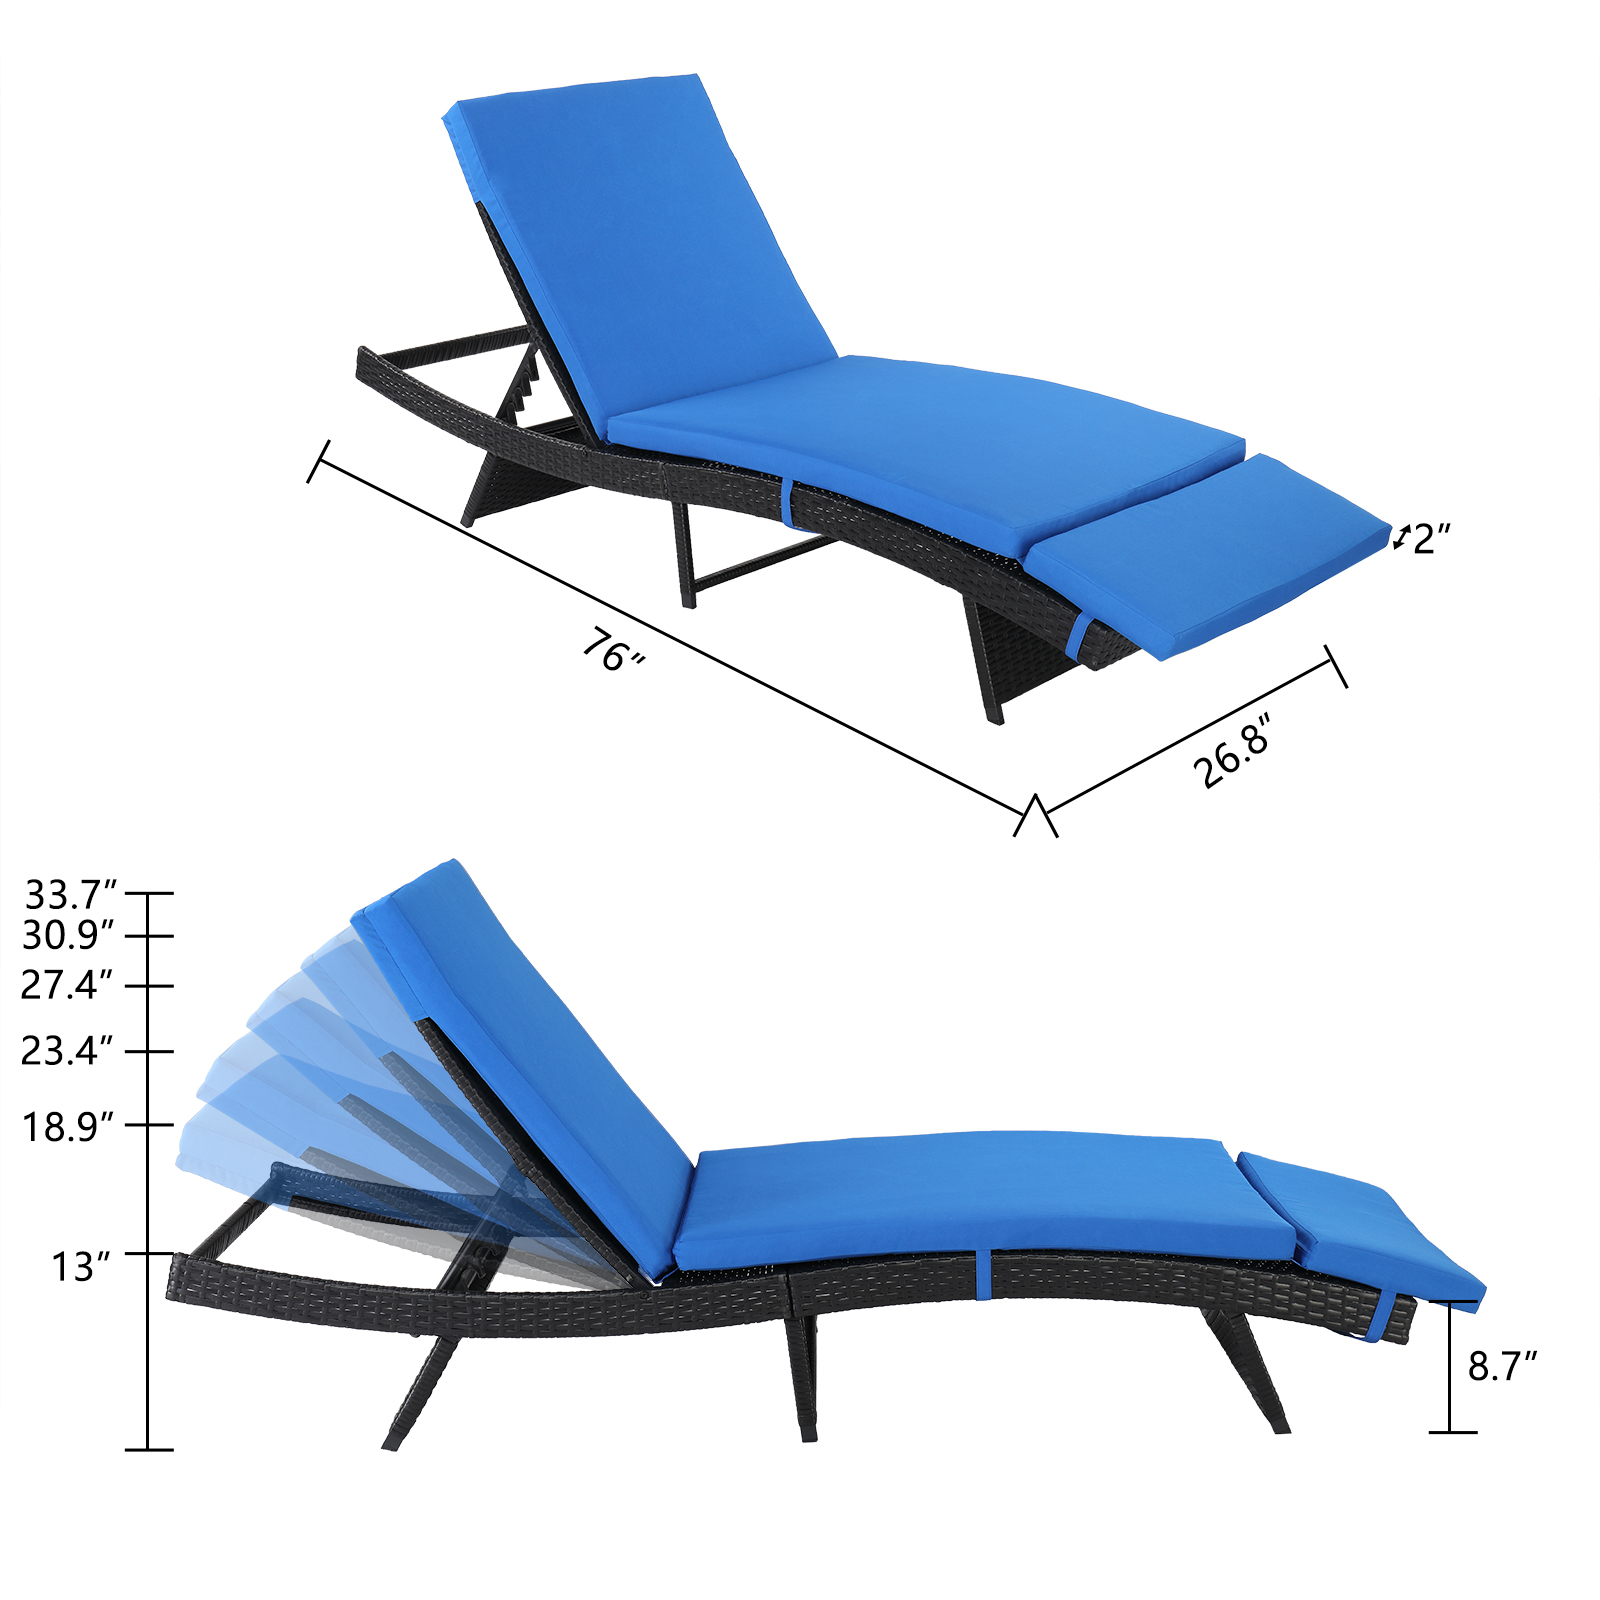 Patio Chaise Lounge Furniture, 5-Position Adjustable Cushioned Rattan Chaise, PE Wicker Backrest Lounger Chair, Suitable for Pool Balcony Deck Yard Garden, B33 - image 5 of 9